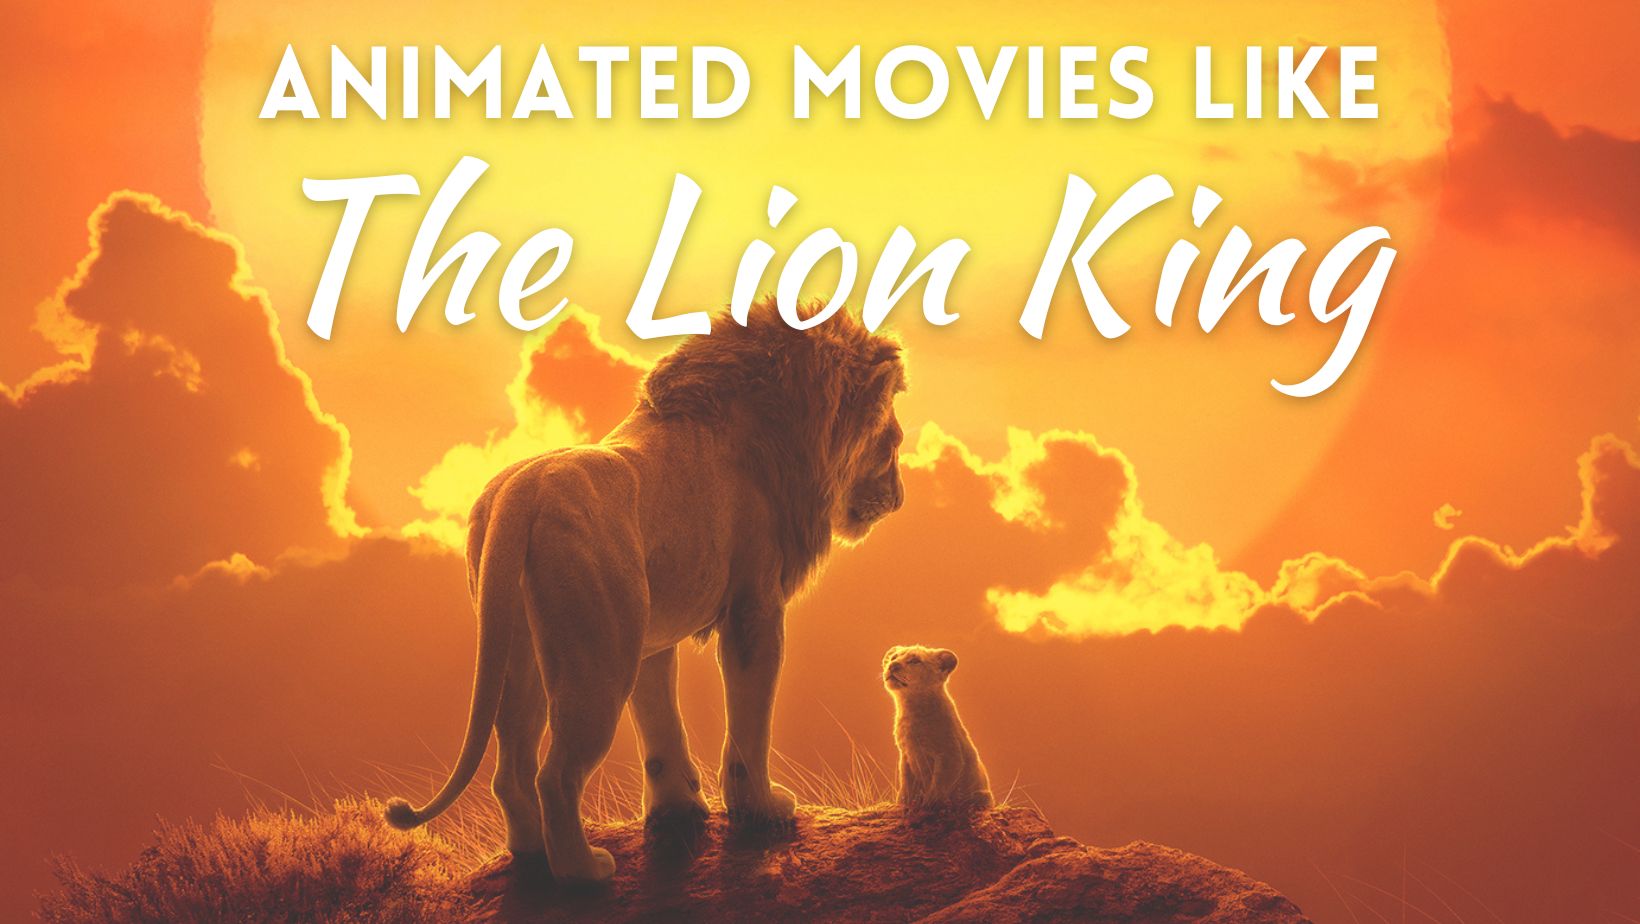 Like This Watch That: Animation Movies Like The Lion King